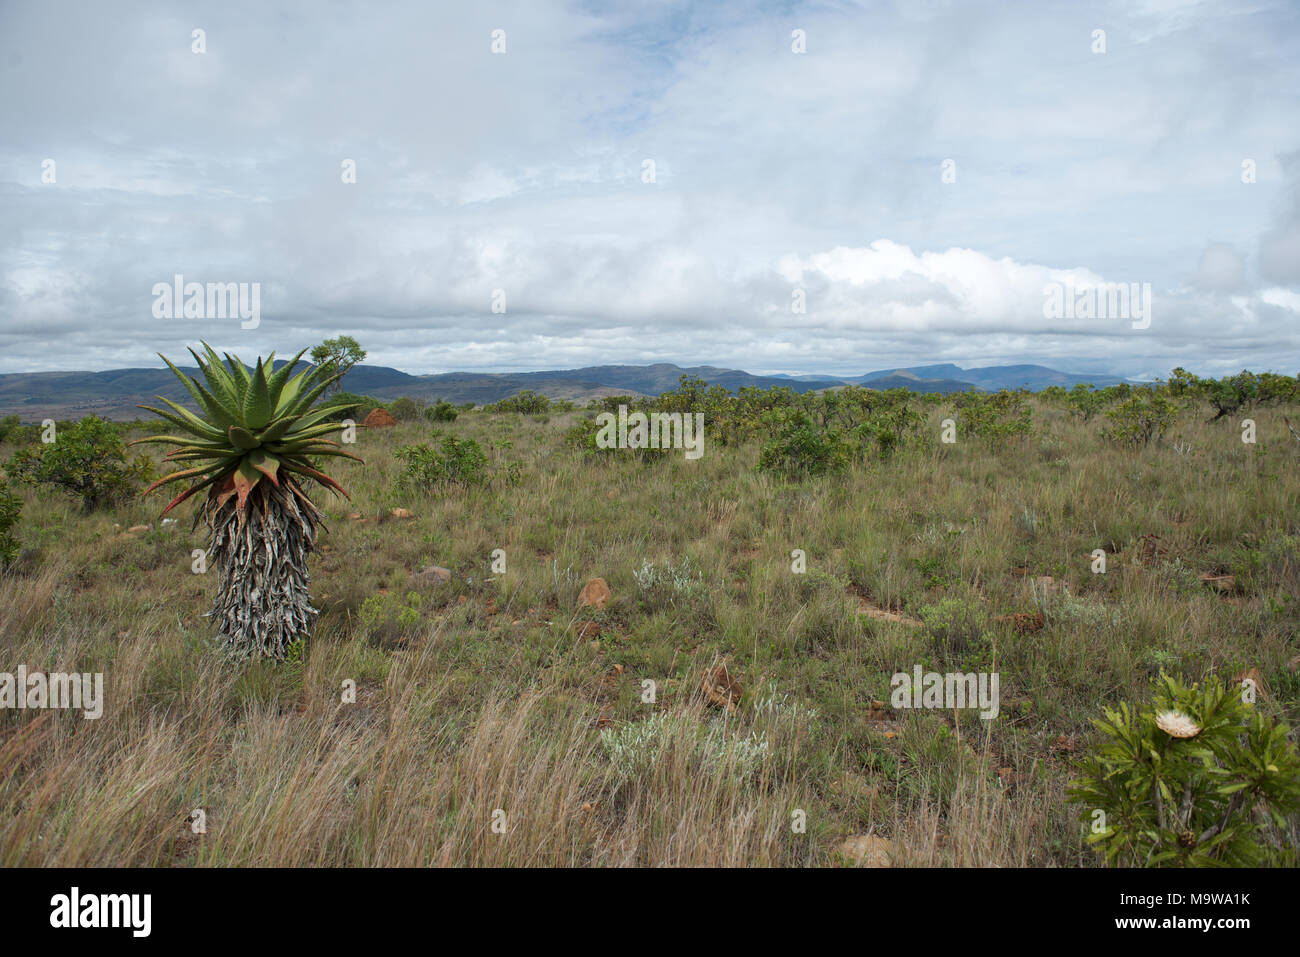 Aloe and Protea growing wild in scrubland in the Kruger National Park, Mpumalanga, South Africa, near to the Mozambique border. Stock Photo